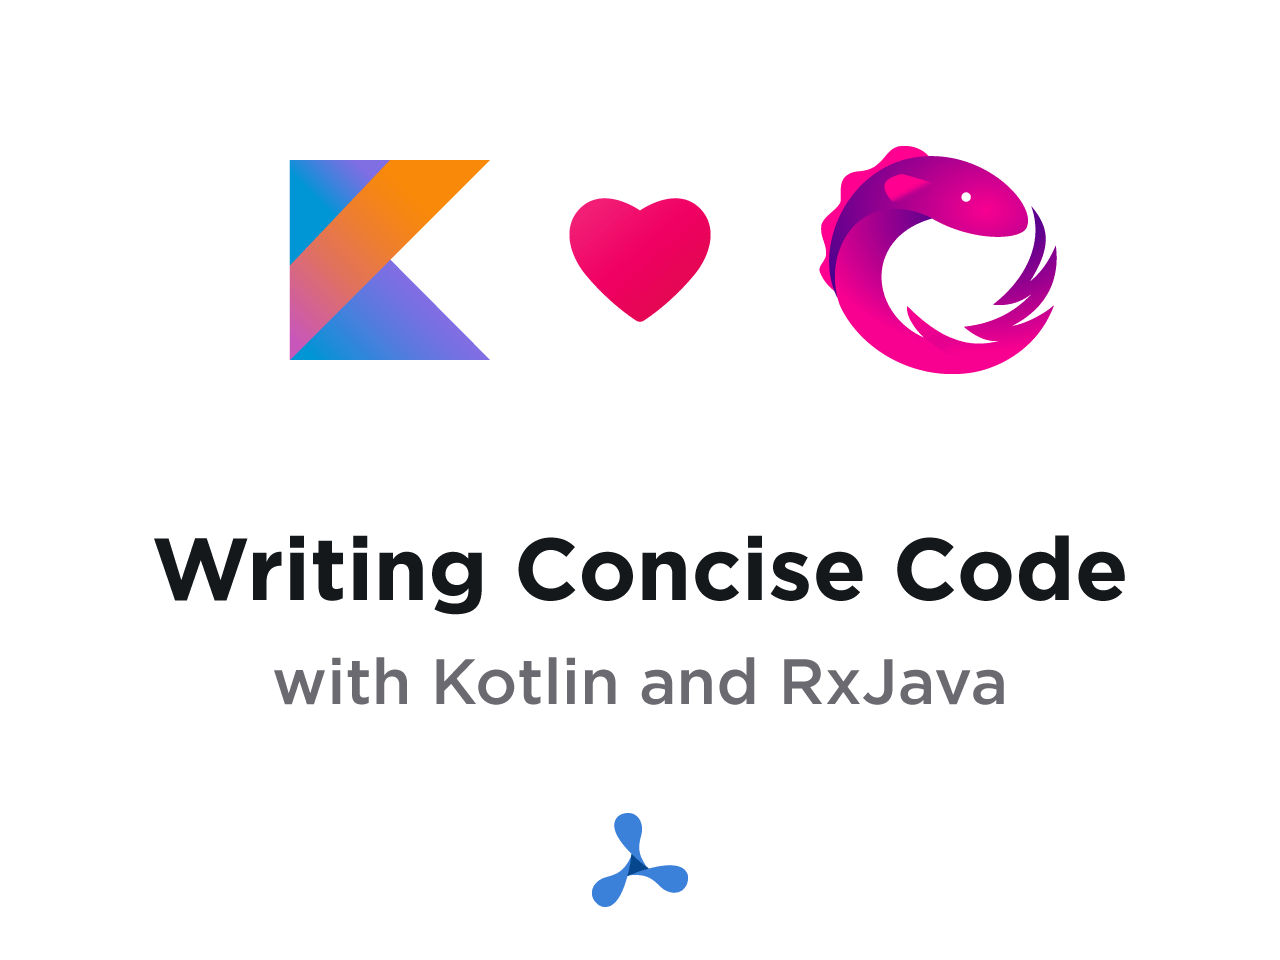 Illustration: Writing Concise Code with Kotlin and RxJava